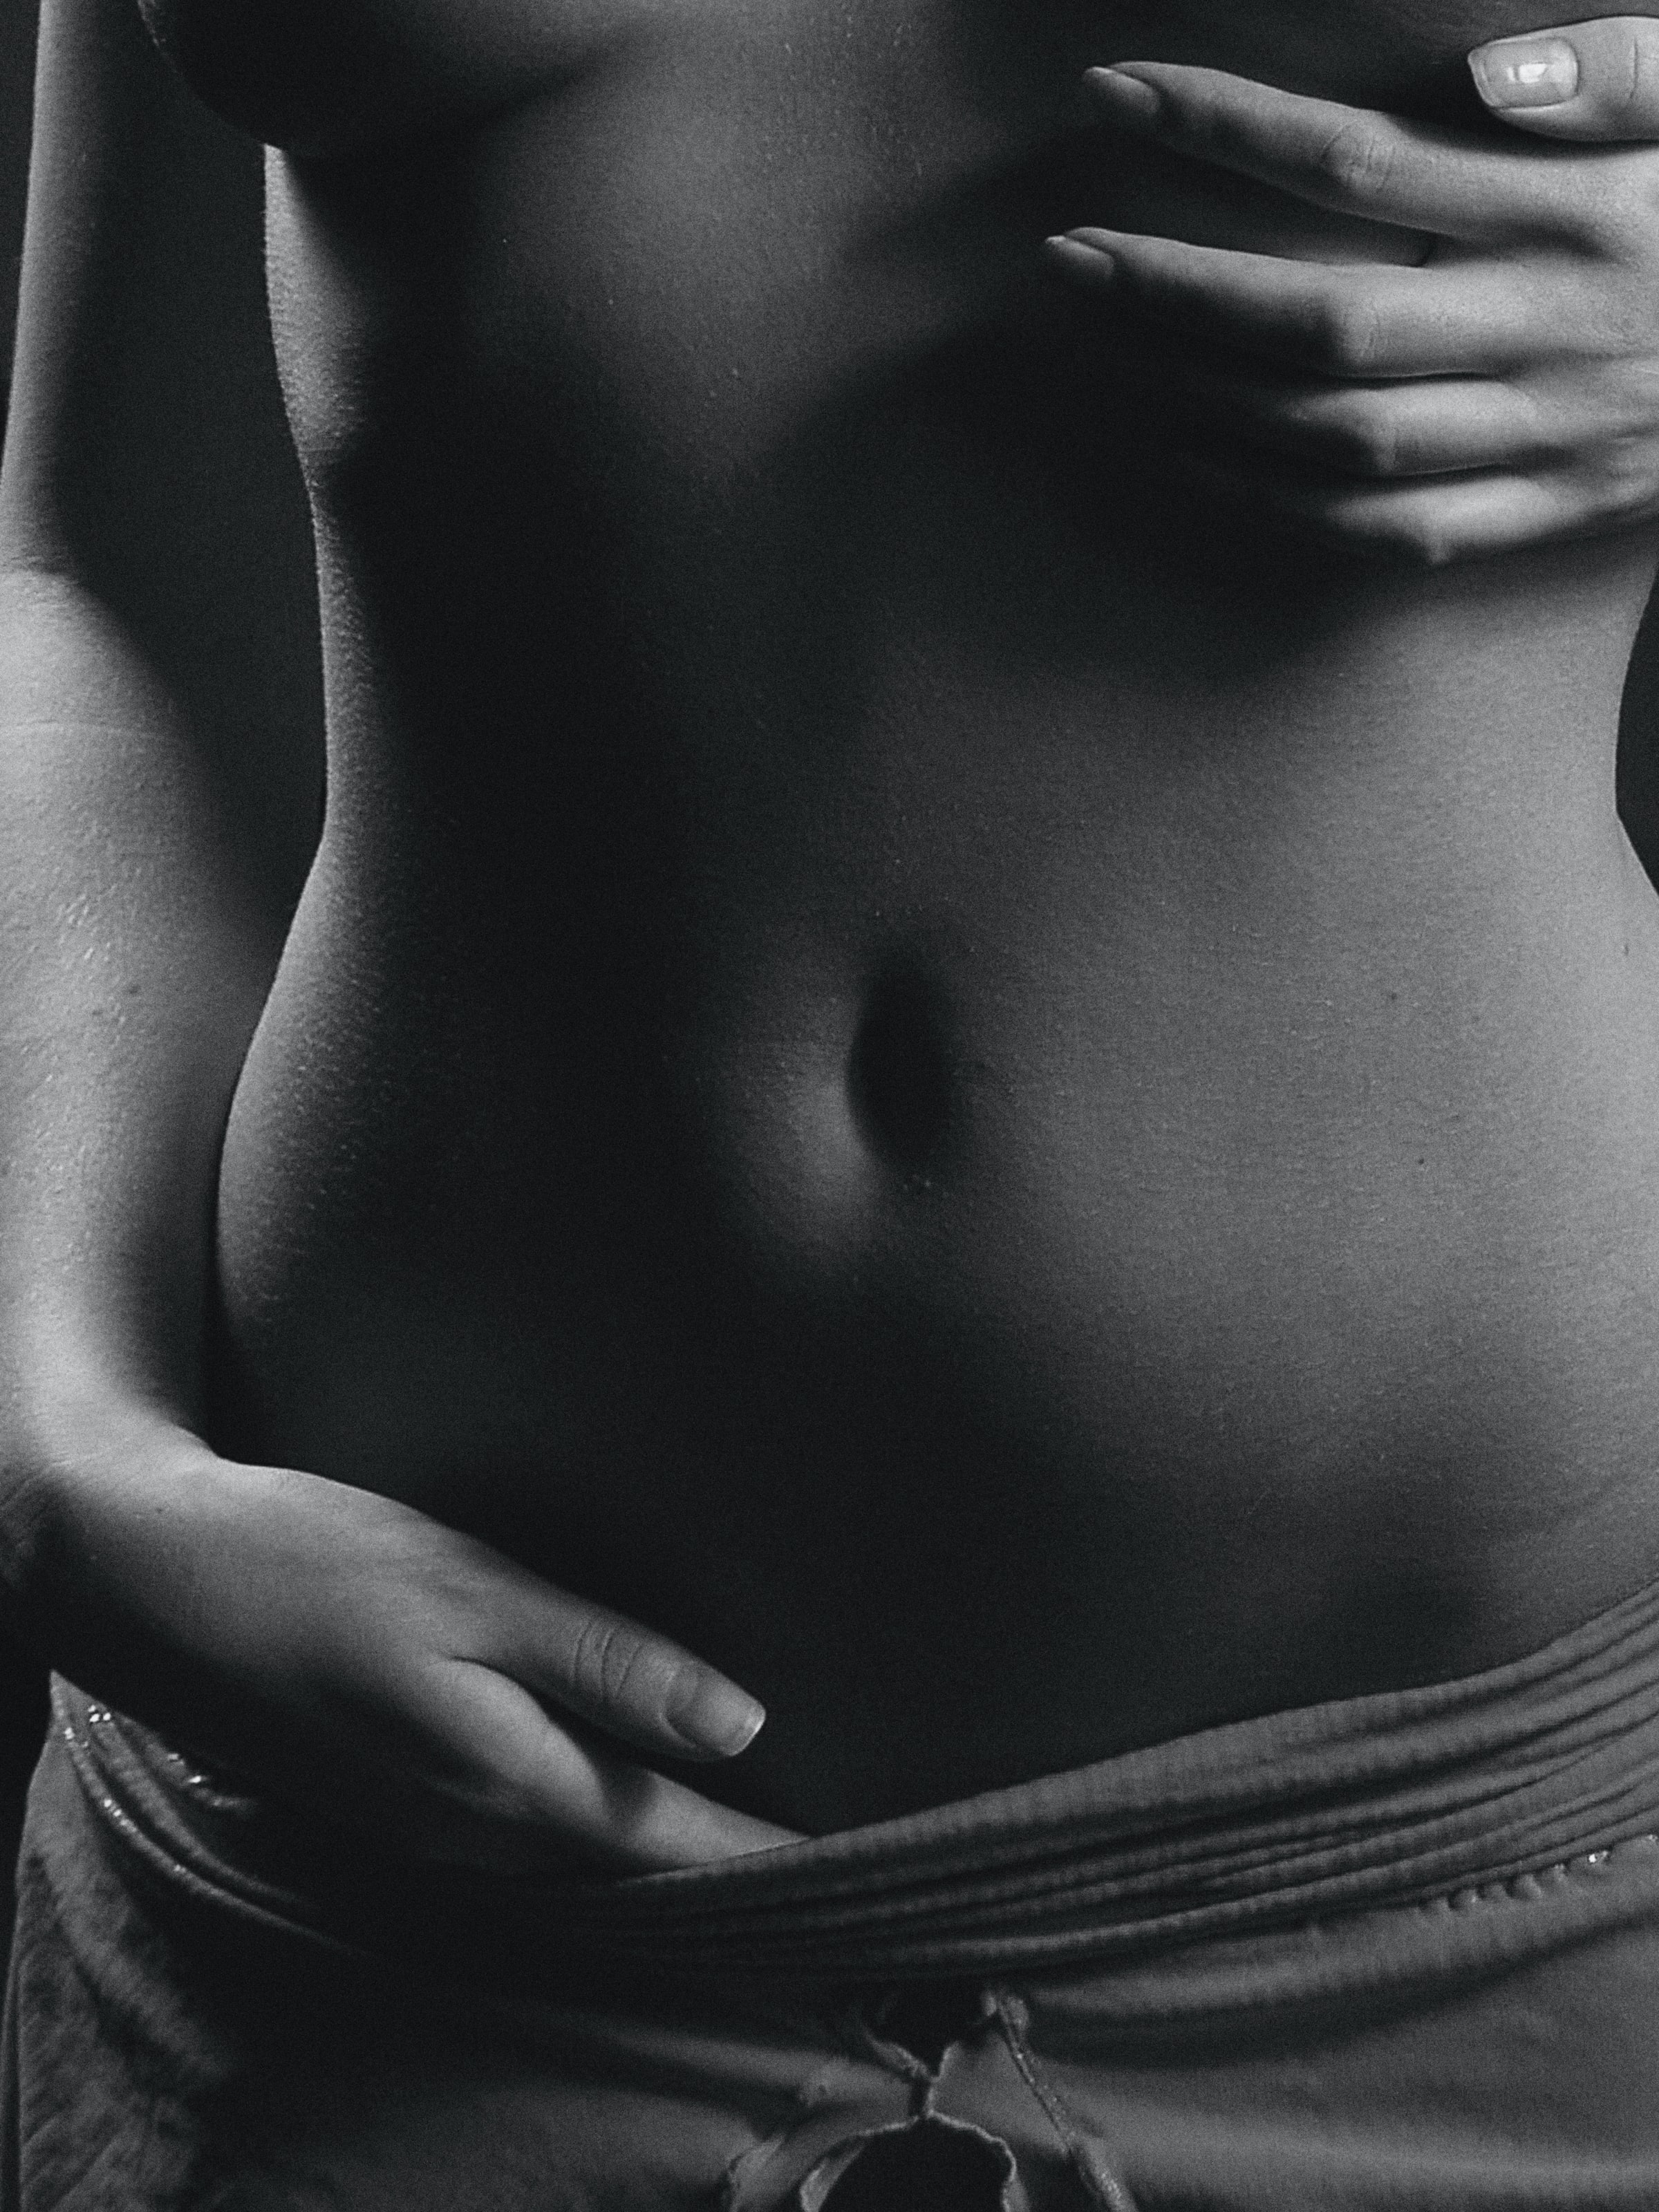 Tummy Tuck Scars: Types, Healing Process, and How To Improve